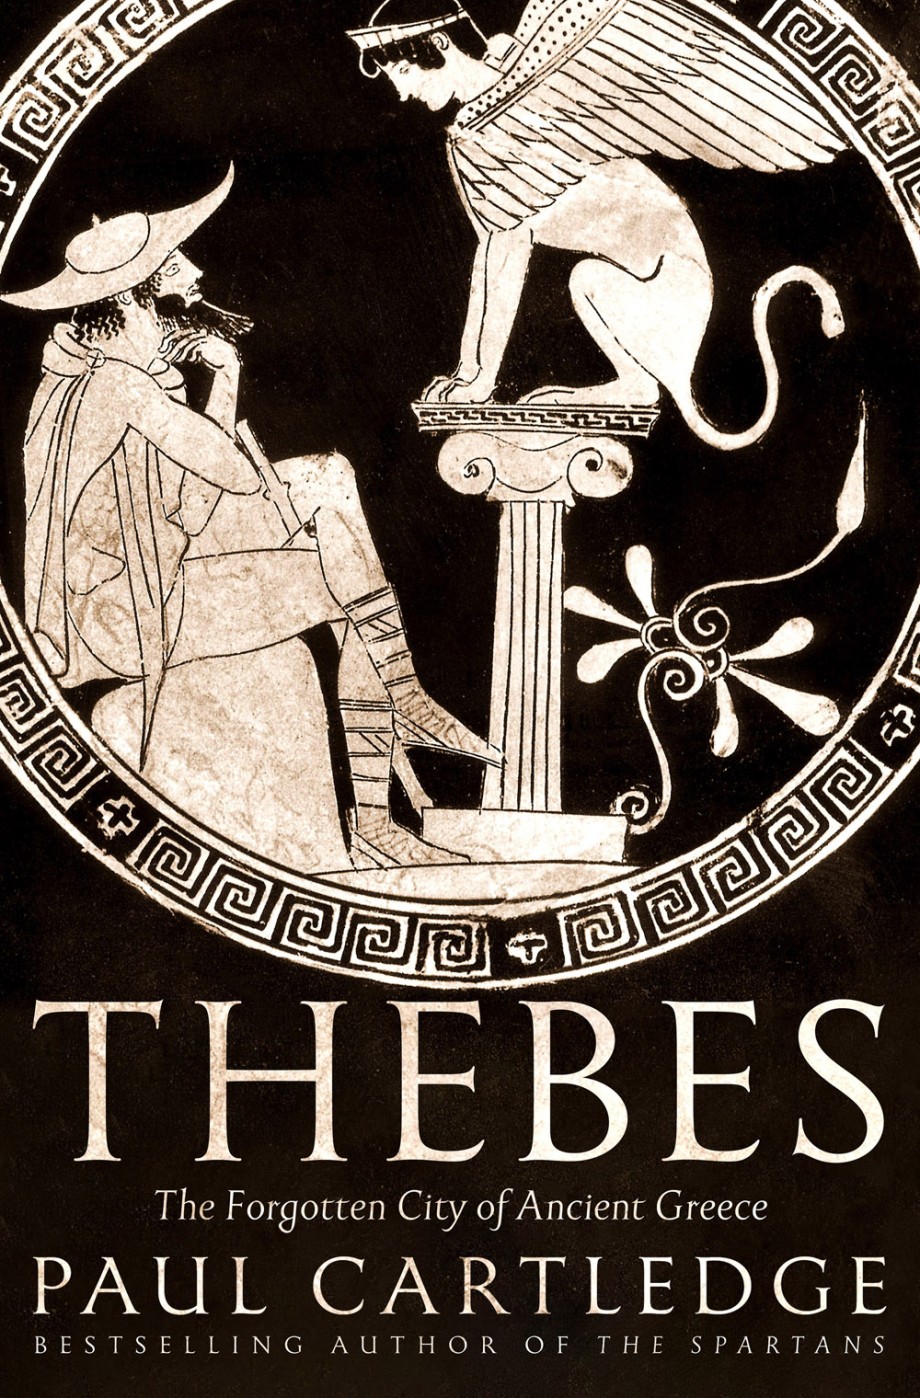 Thebes The Forgotten City of Ancient Greece